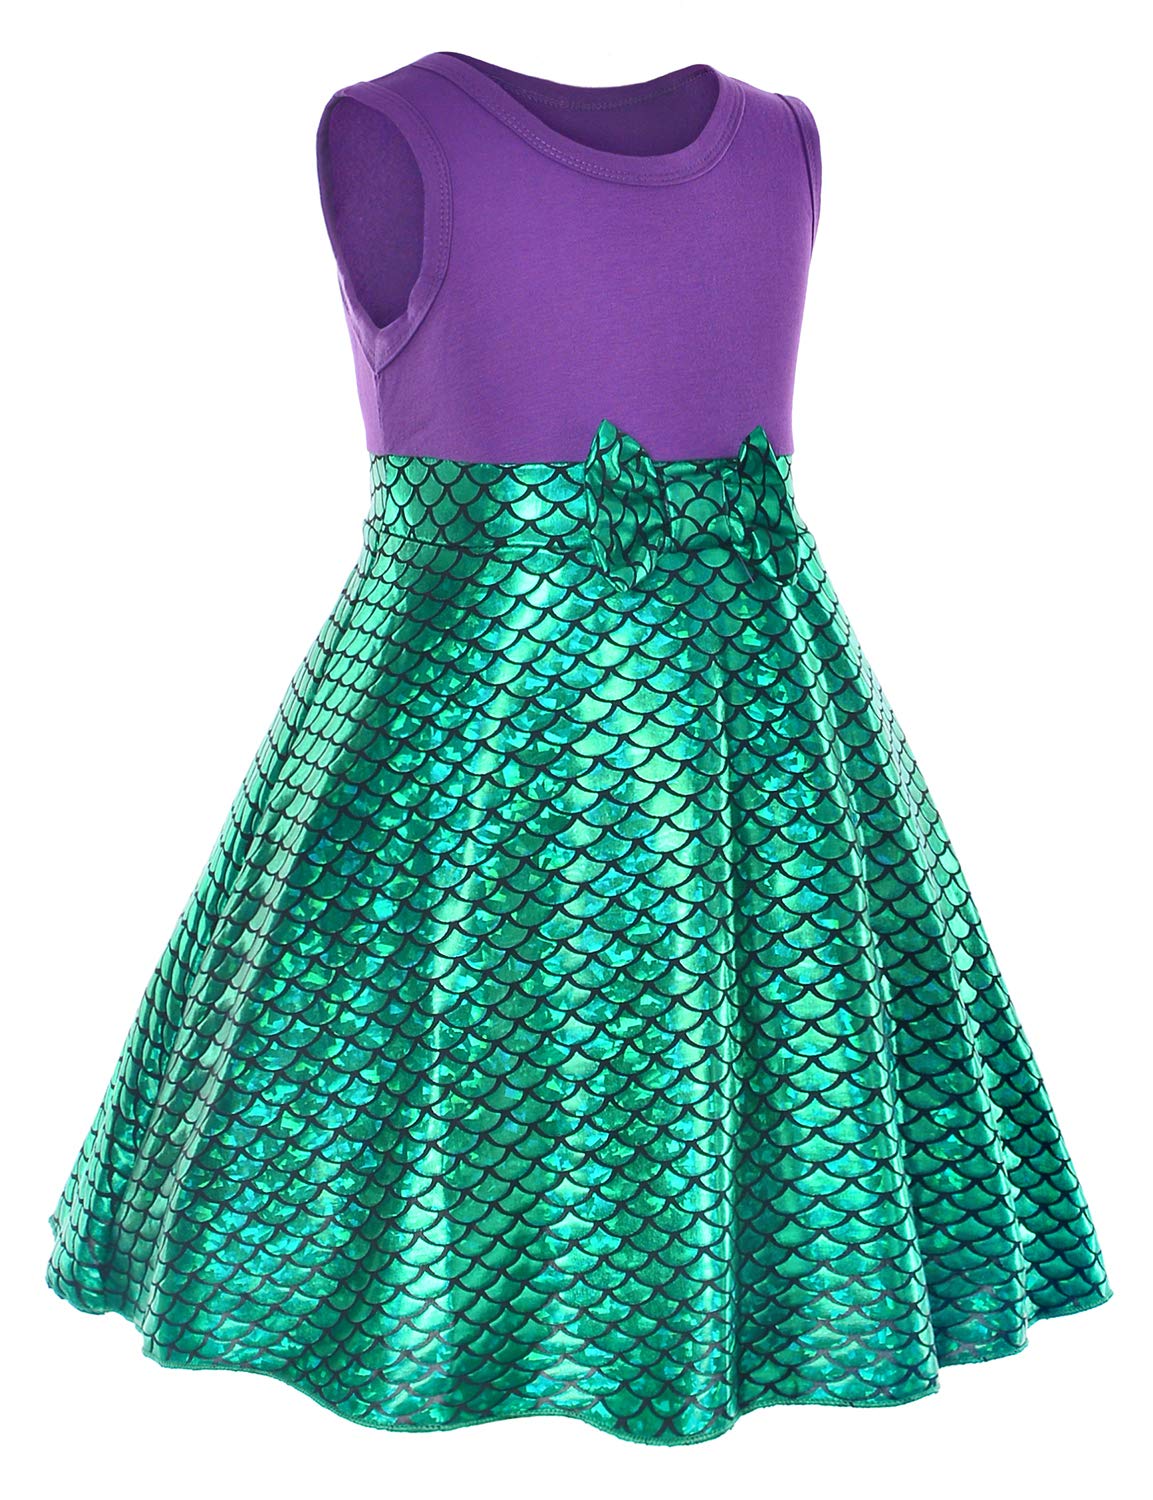 Party Chili Princess Mermaid Green Dress Costumes for Toddler Little Girls With Headband,Crown,Mace,Gloves,Necklace,Earrings